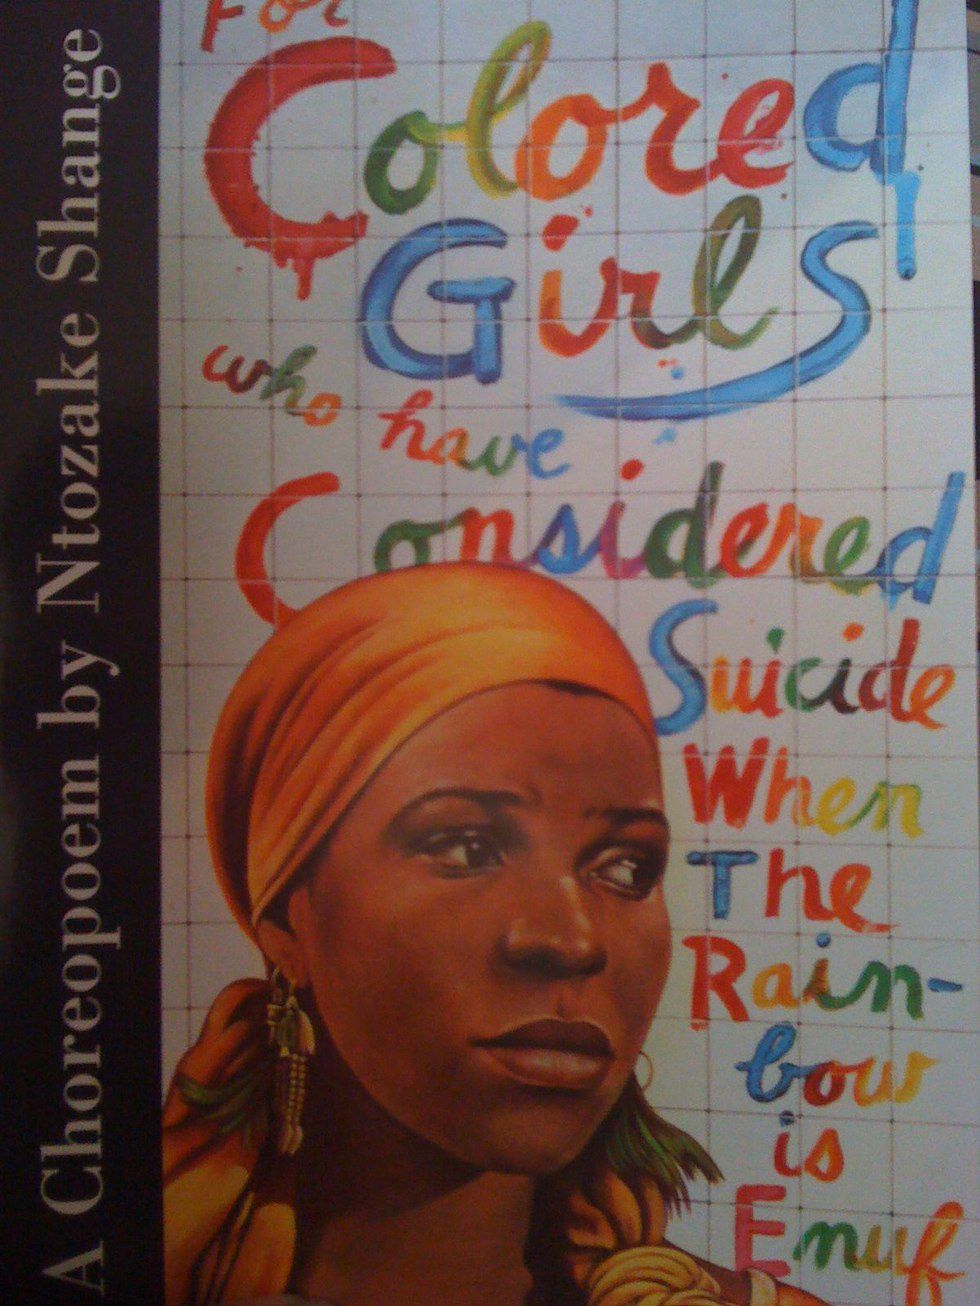 For Colored Girls Who Have Considered Suicide When The Rainbow Is Enuf by Ntozake Shange